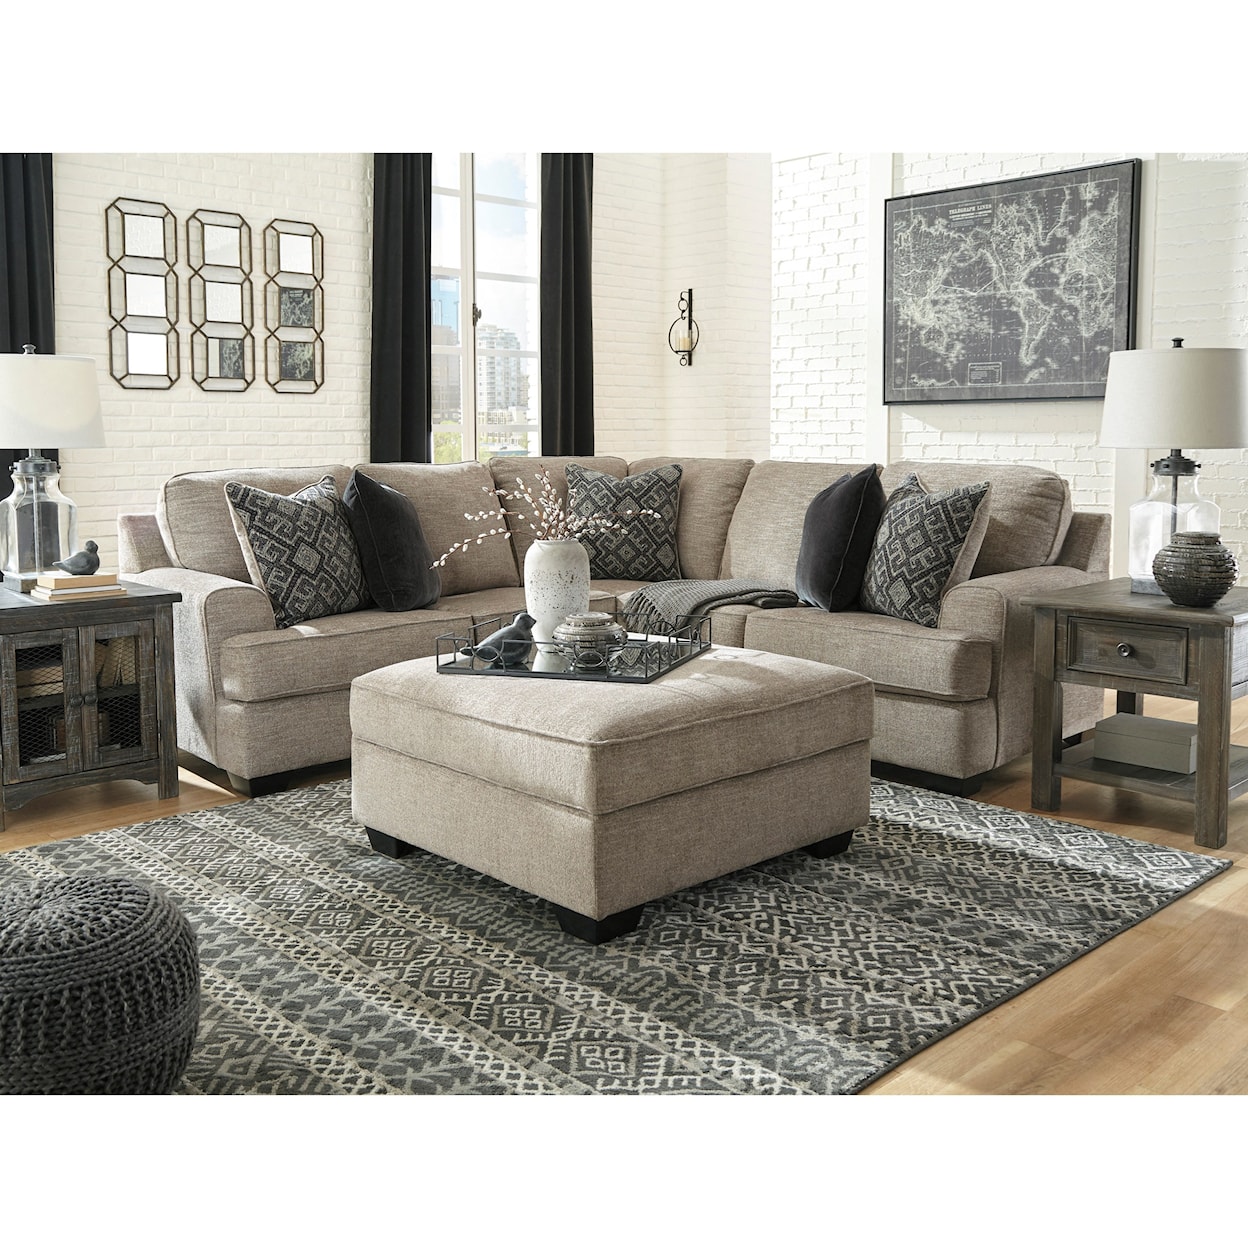 Signature Design by Ashley Bovarian Stationary Living Room Group